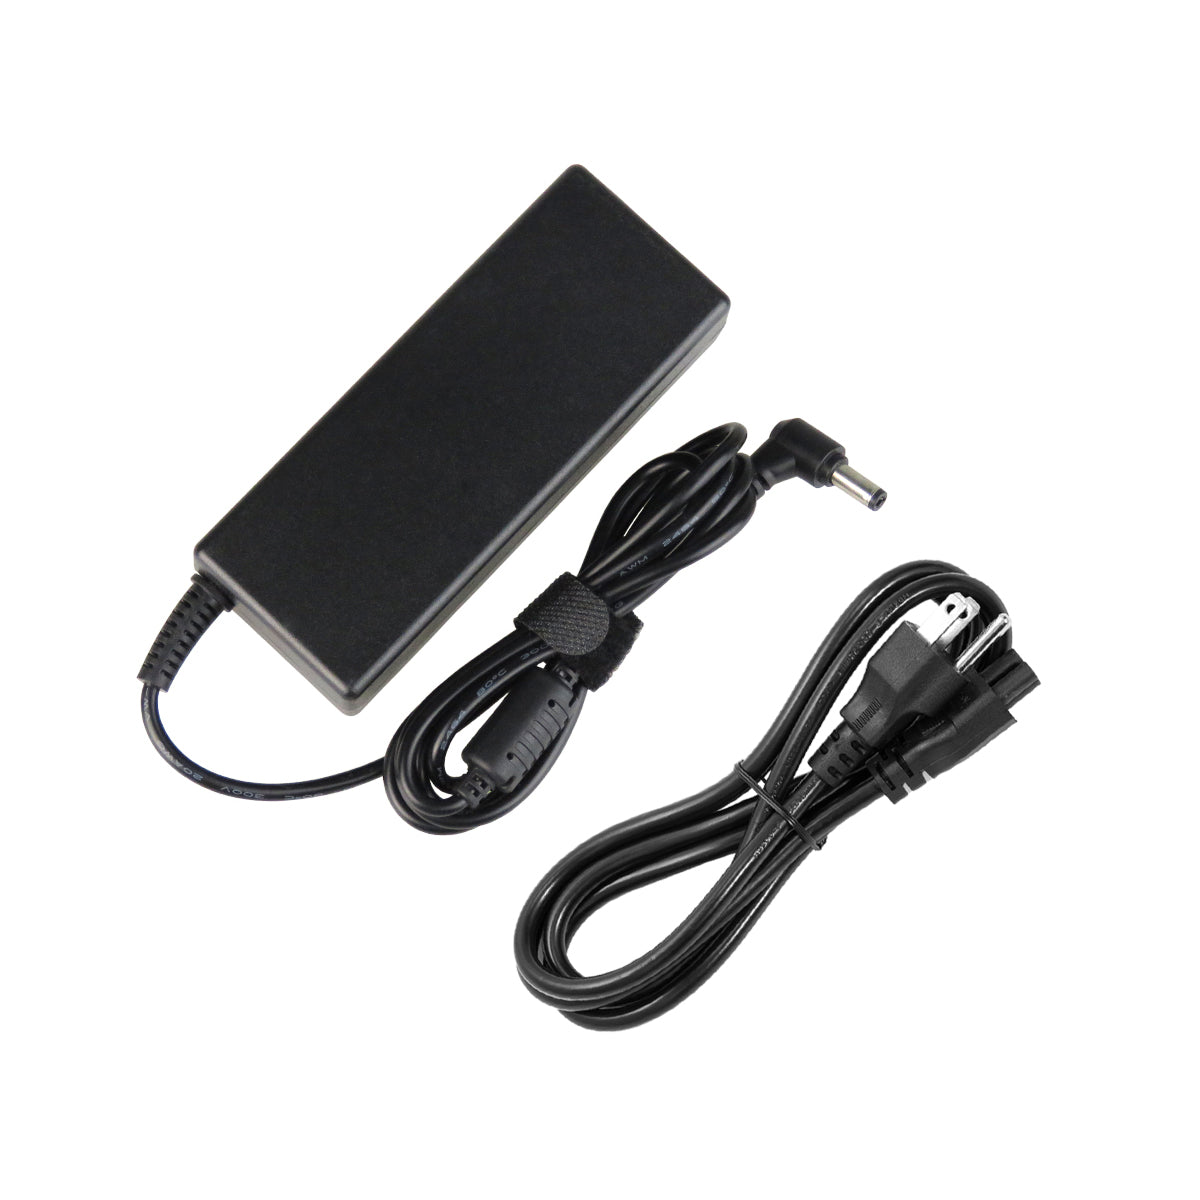 AC Adapter Charger for ASUS K45VM Notebook.